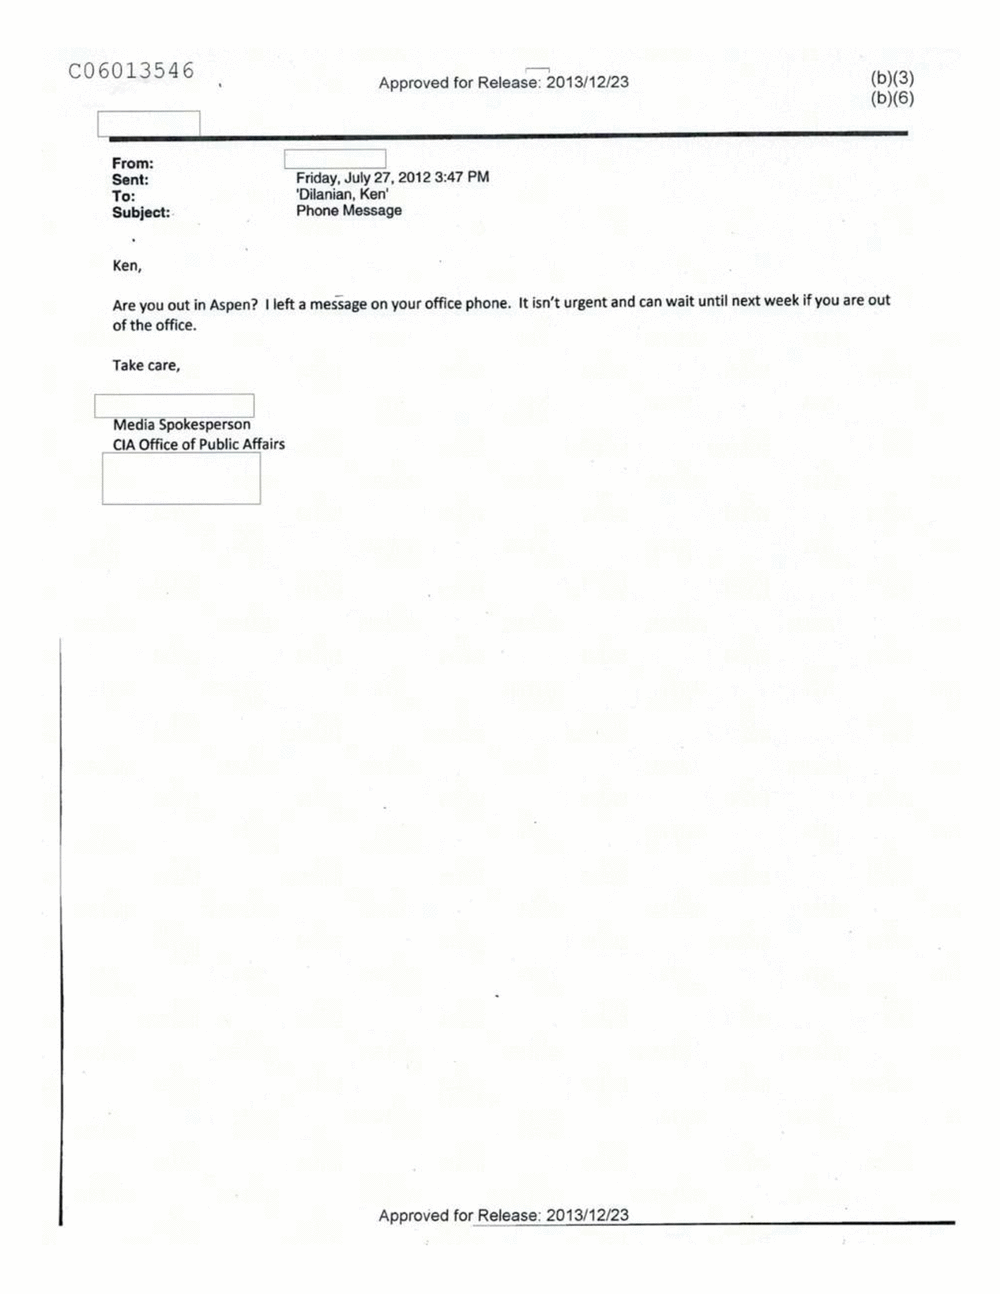 Page 408 from Email Correspondence Between Reporters and CIA Flacks